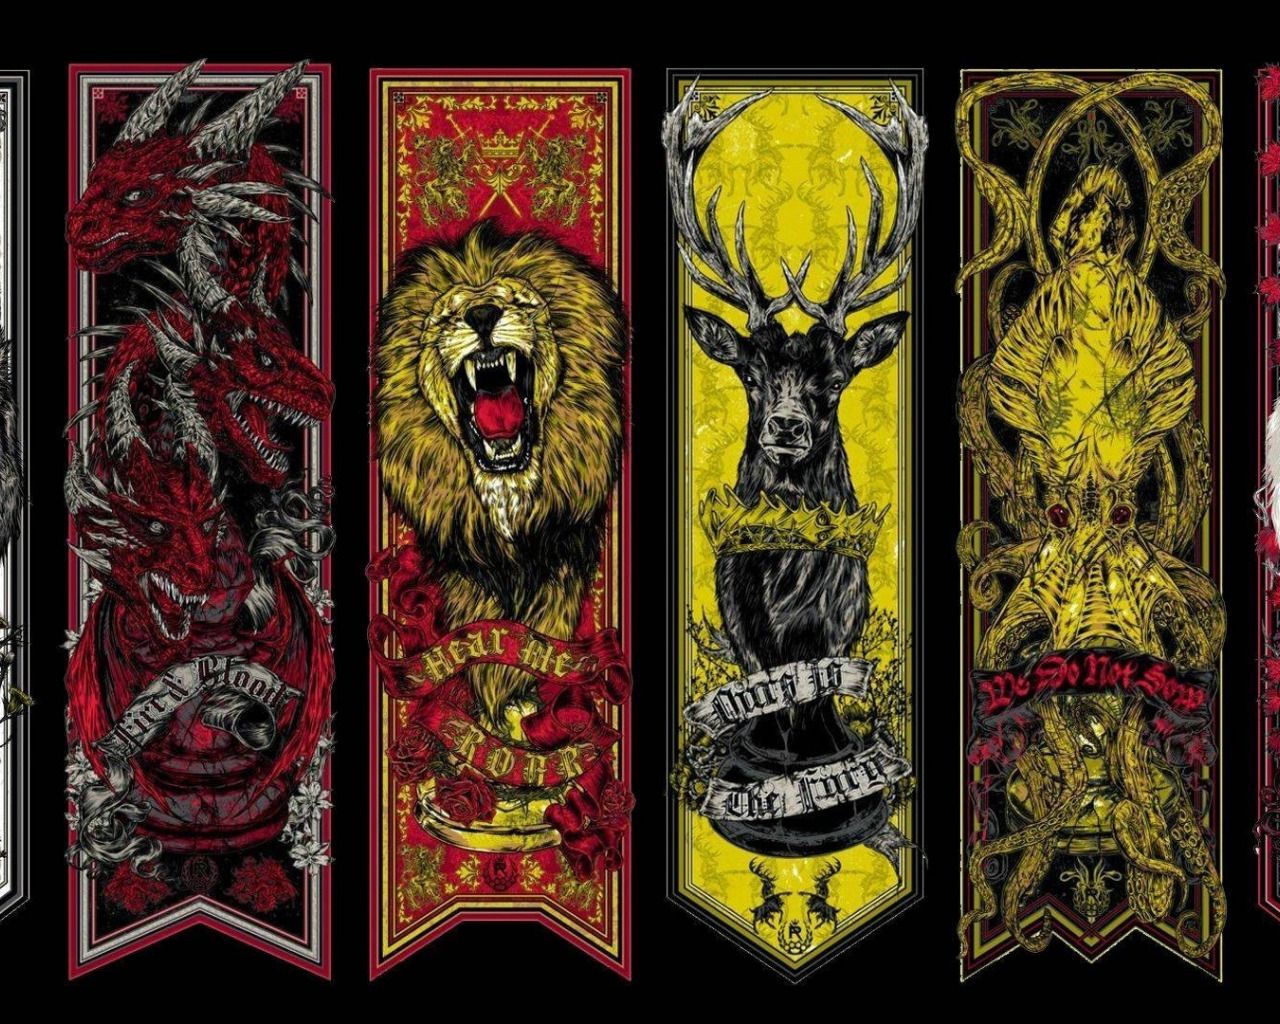 Download wallpaper moon, crow, lion, wolf, dragon, A Song of Ice and Fire, Game of Thrones, Winterfell, Westeros, deer, Stark, Targaryen, Lannister, Greyjoy, Baratheon, medieval, section films in resolution 1280x1024